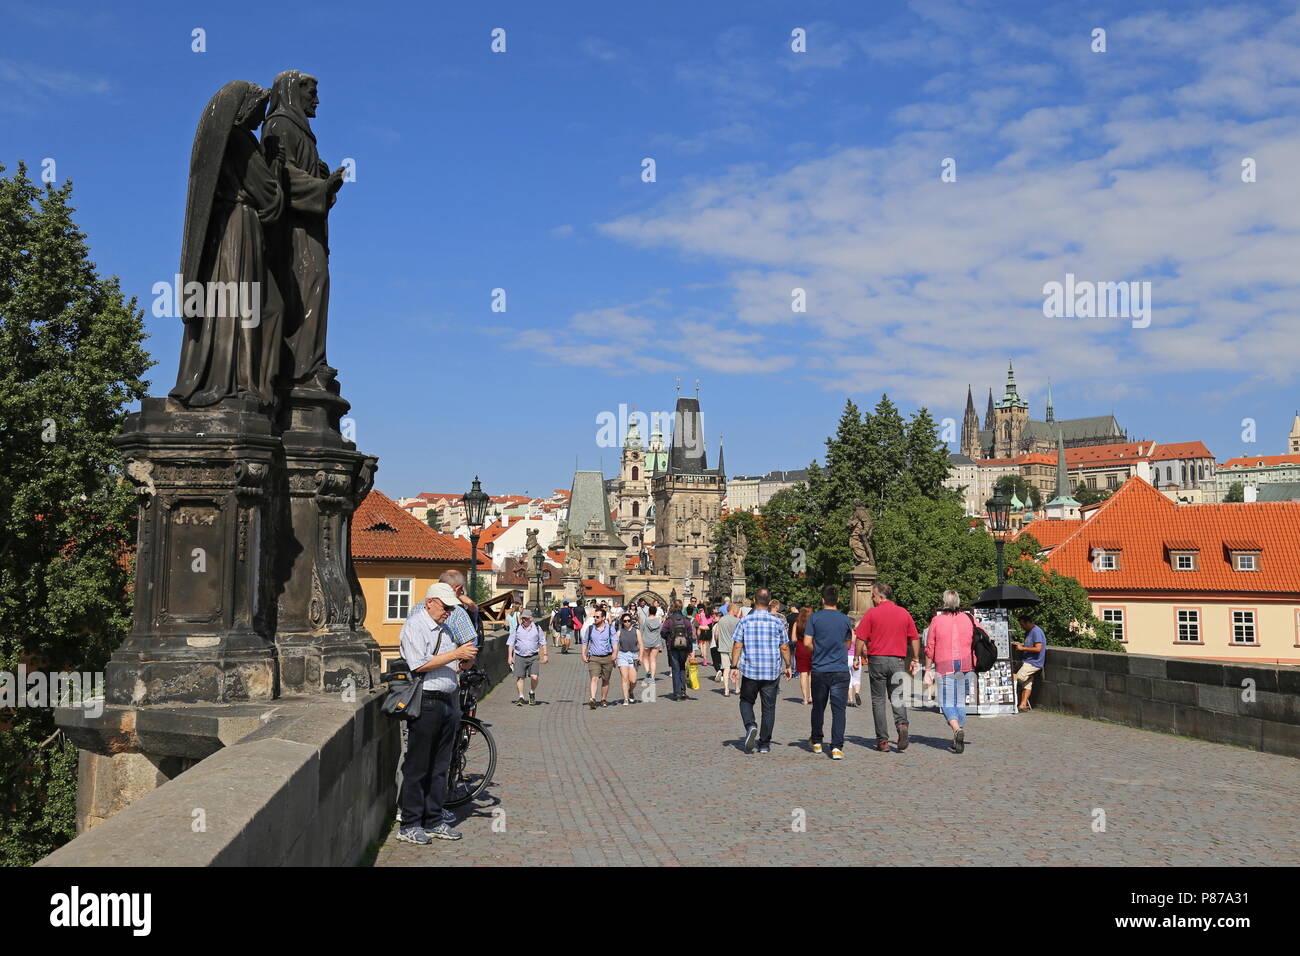 Statue of St Francis of Assisi with two angels, Charles Bridge, Prague, Czechia (Czech Republic), Europe Stock Photo